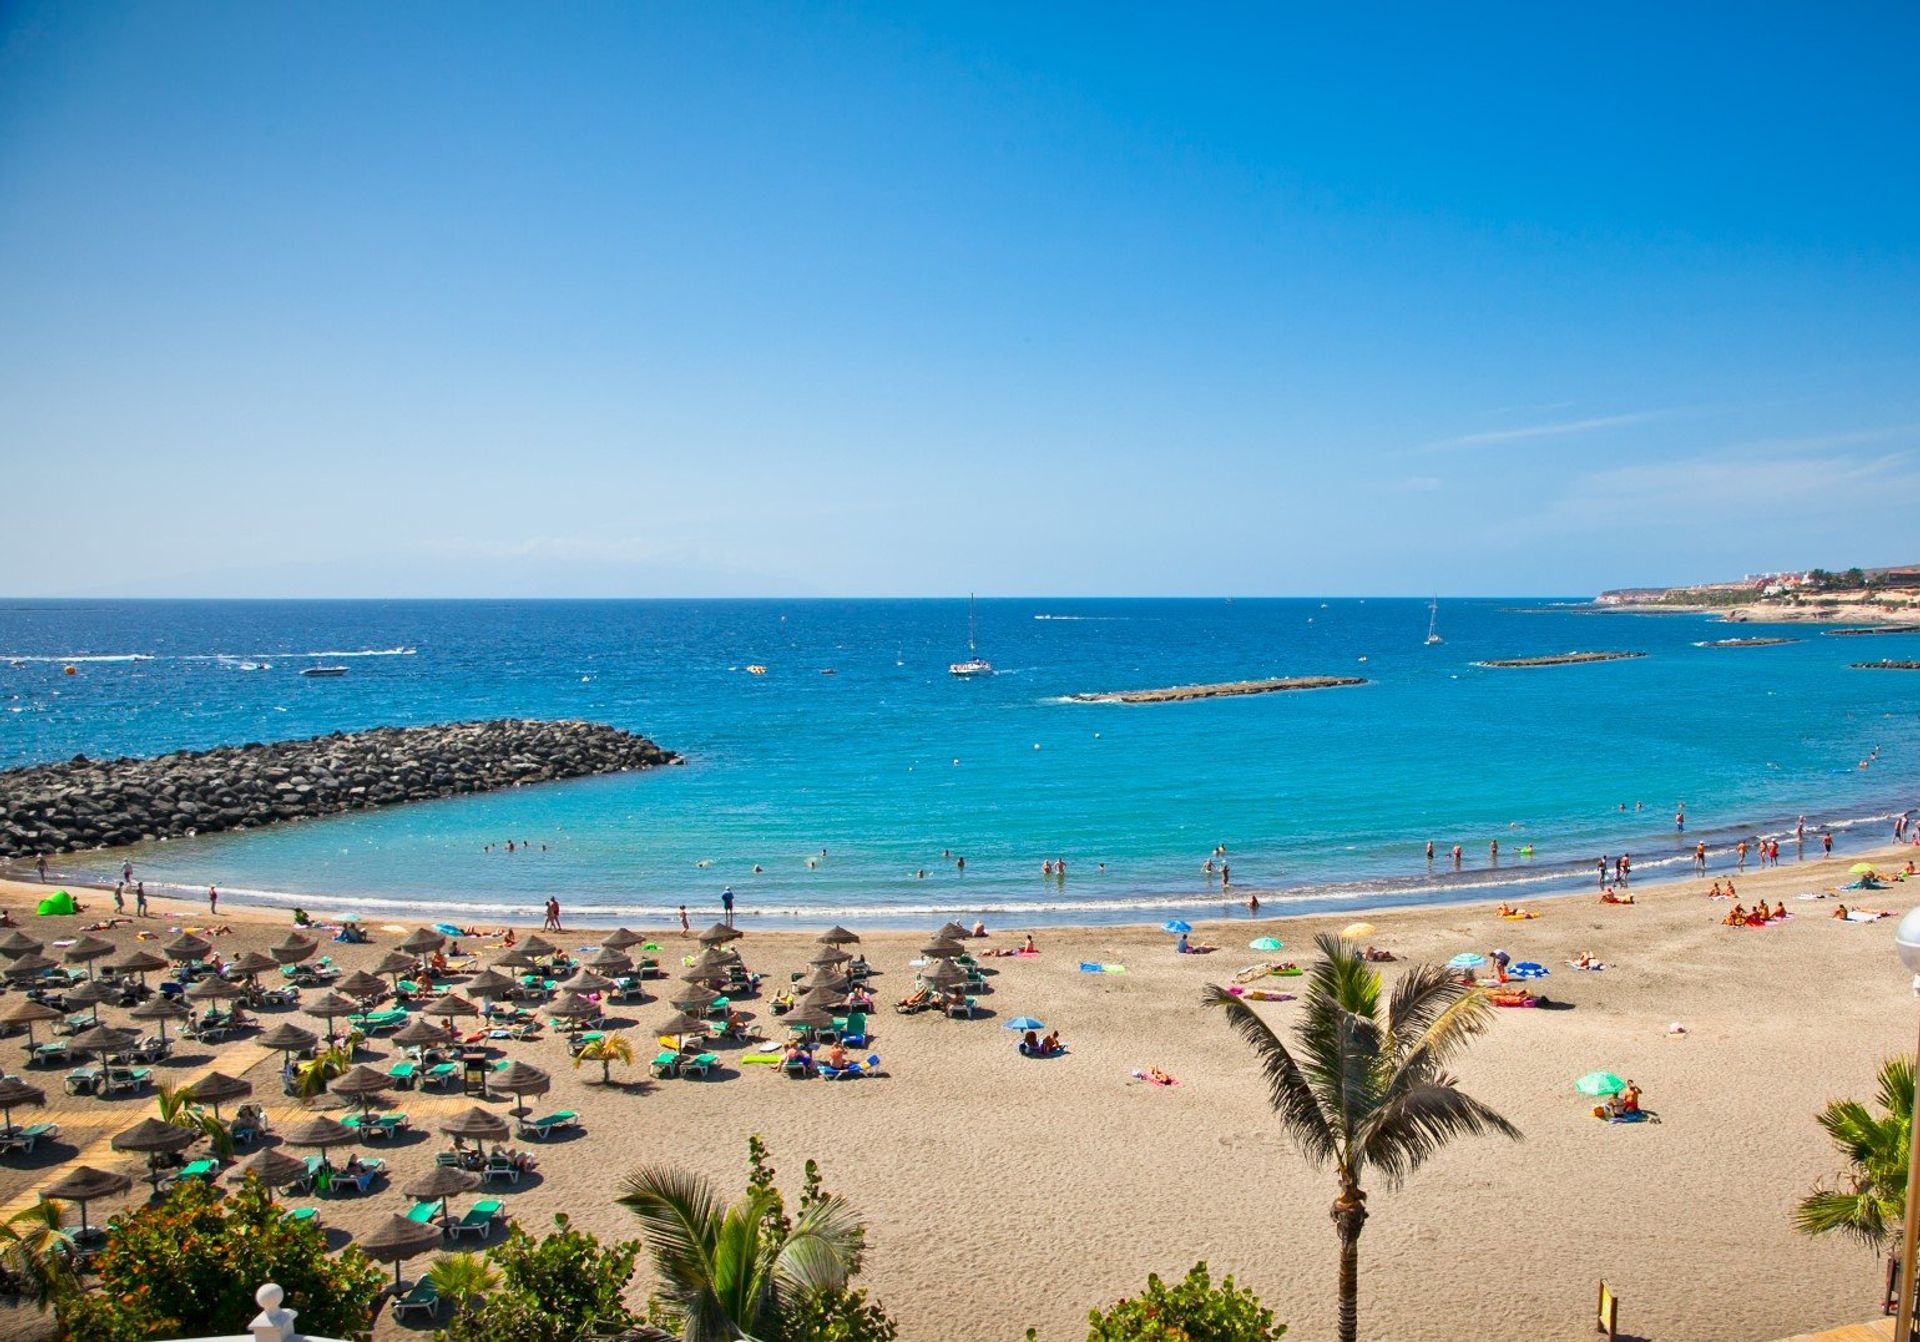 The blue waters, golden sands and lively atmosphere of Playa de las Americas, less than a 20 minute drive from Arona